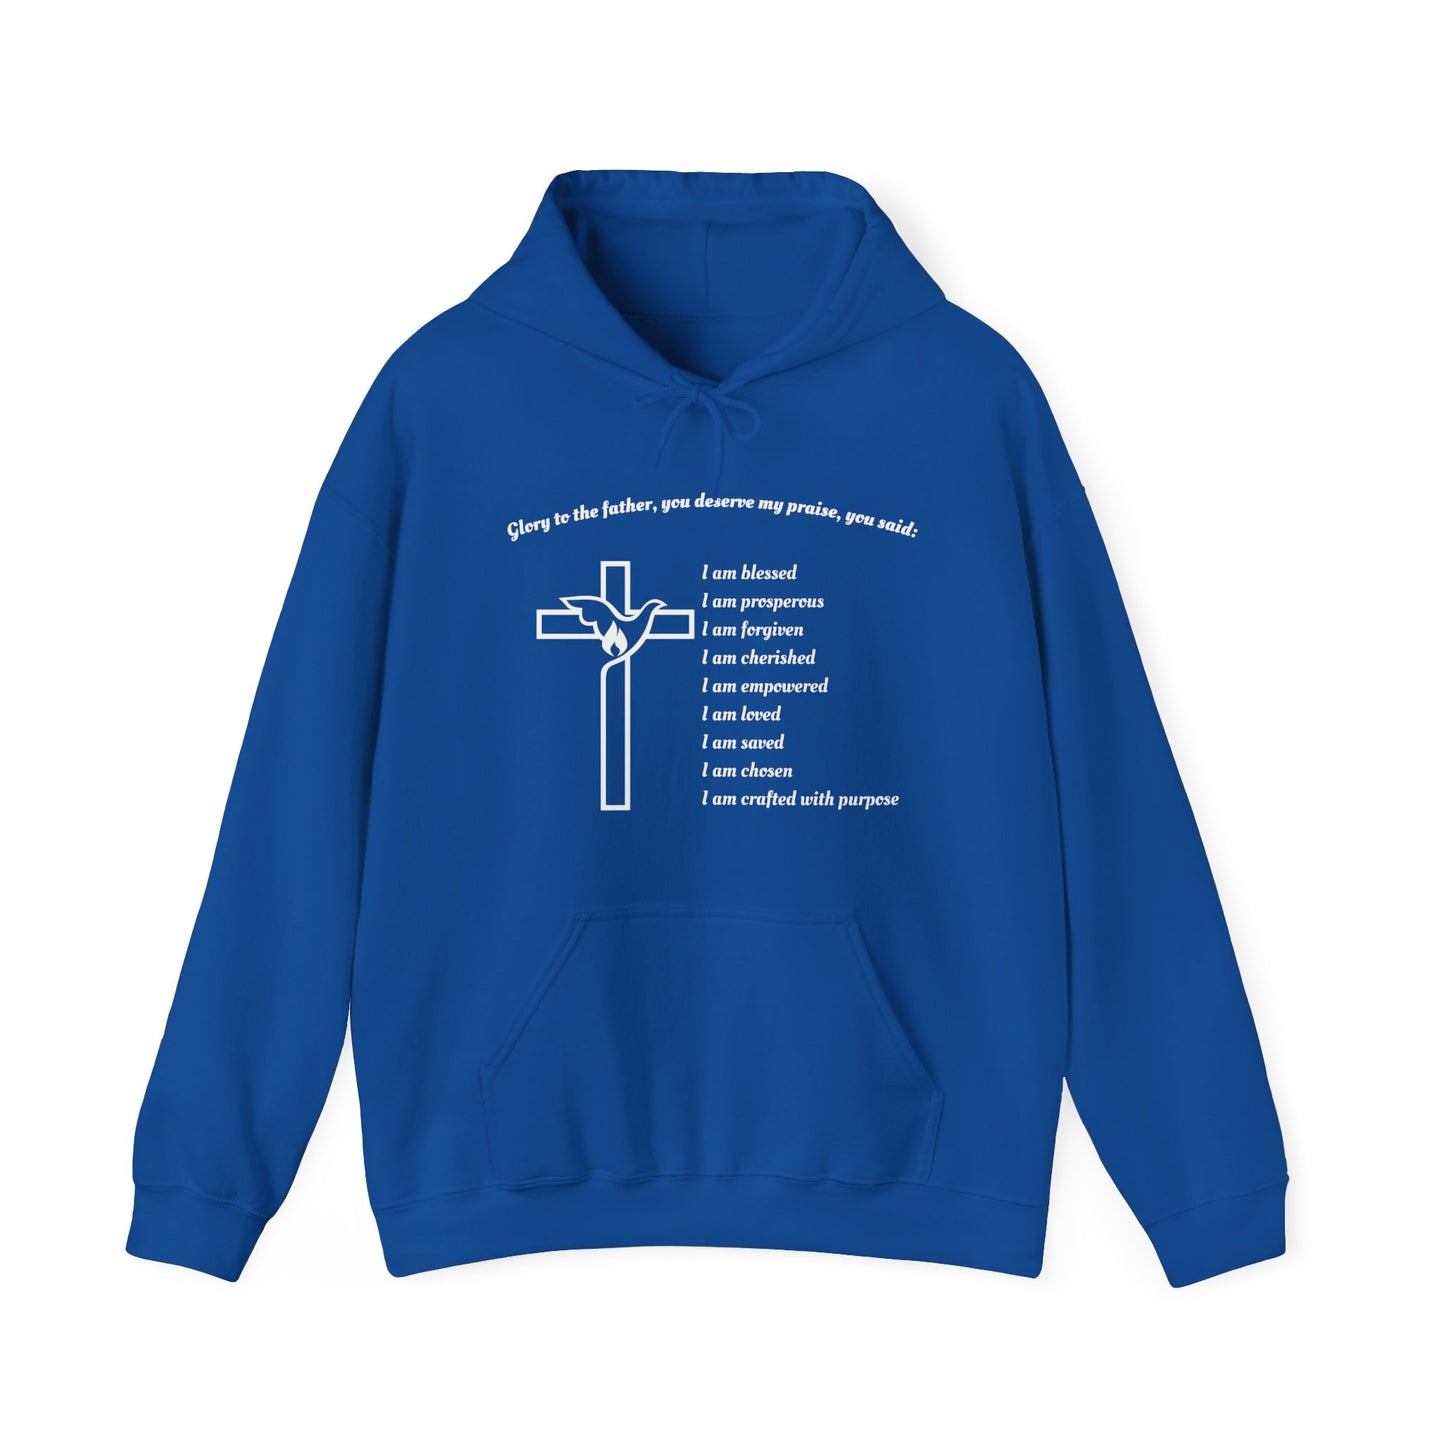 I am Glory to the Father Hooded Sweatshirt Unisex Cozy Heavy Blend52